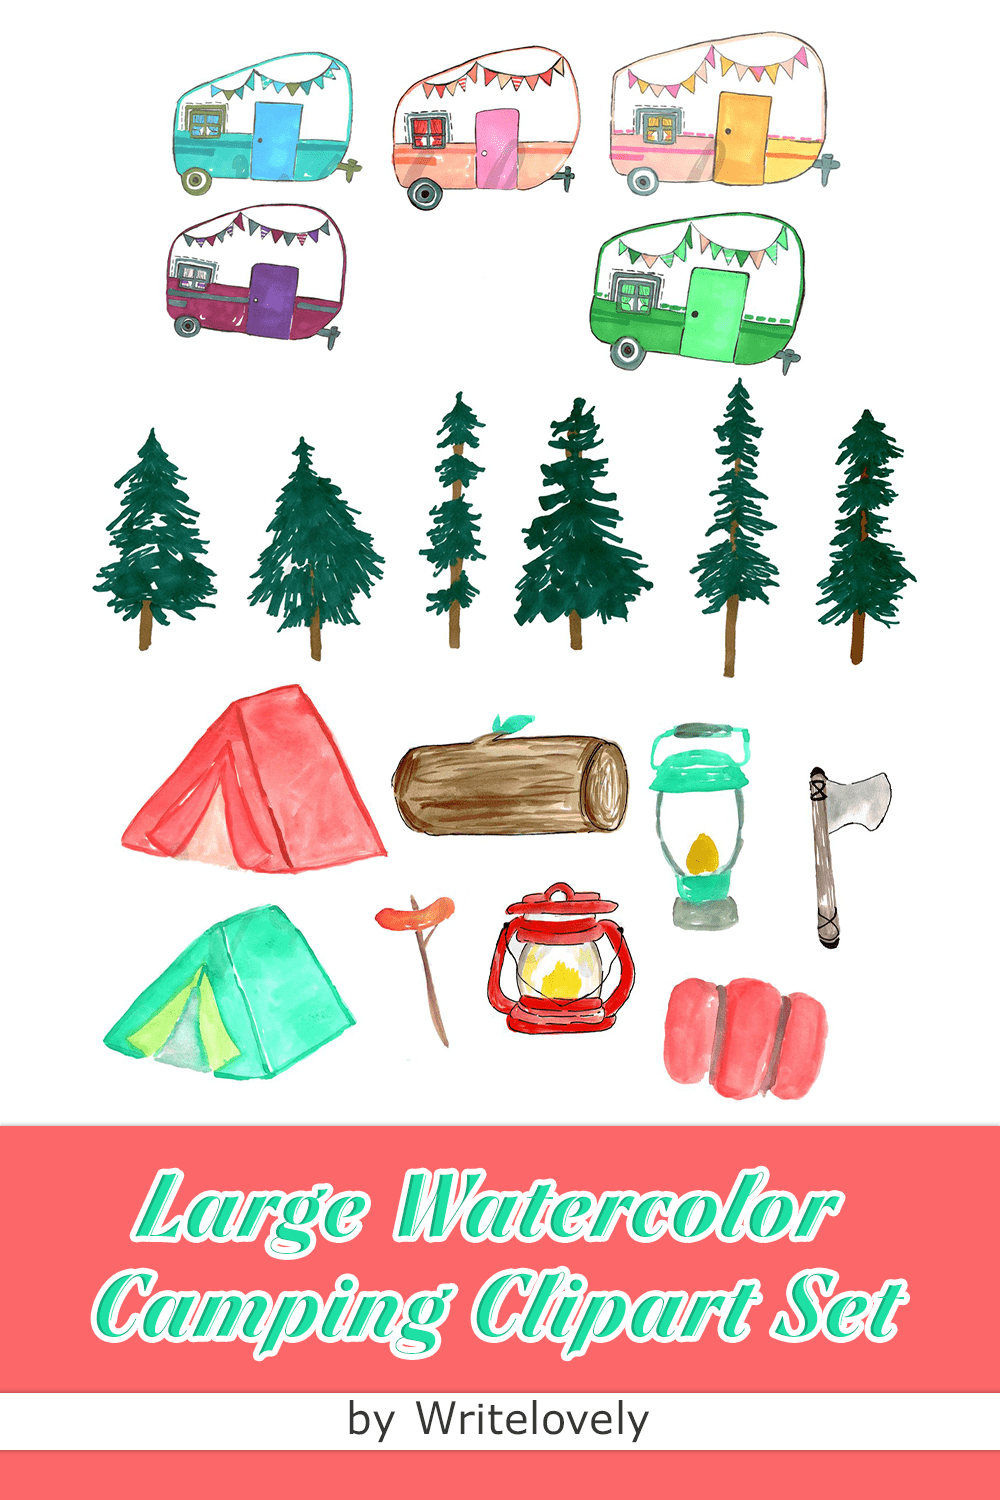 Large watercolor camping clipart set - pinterest image preview.